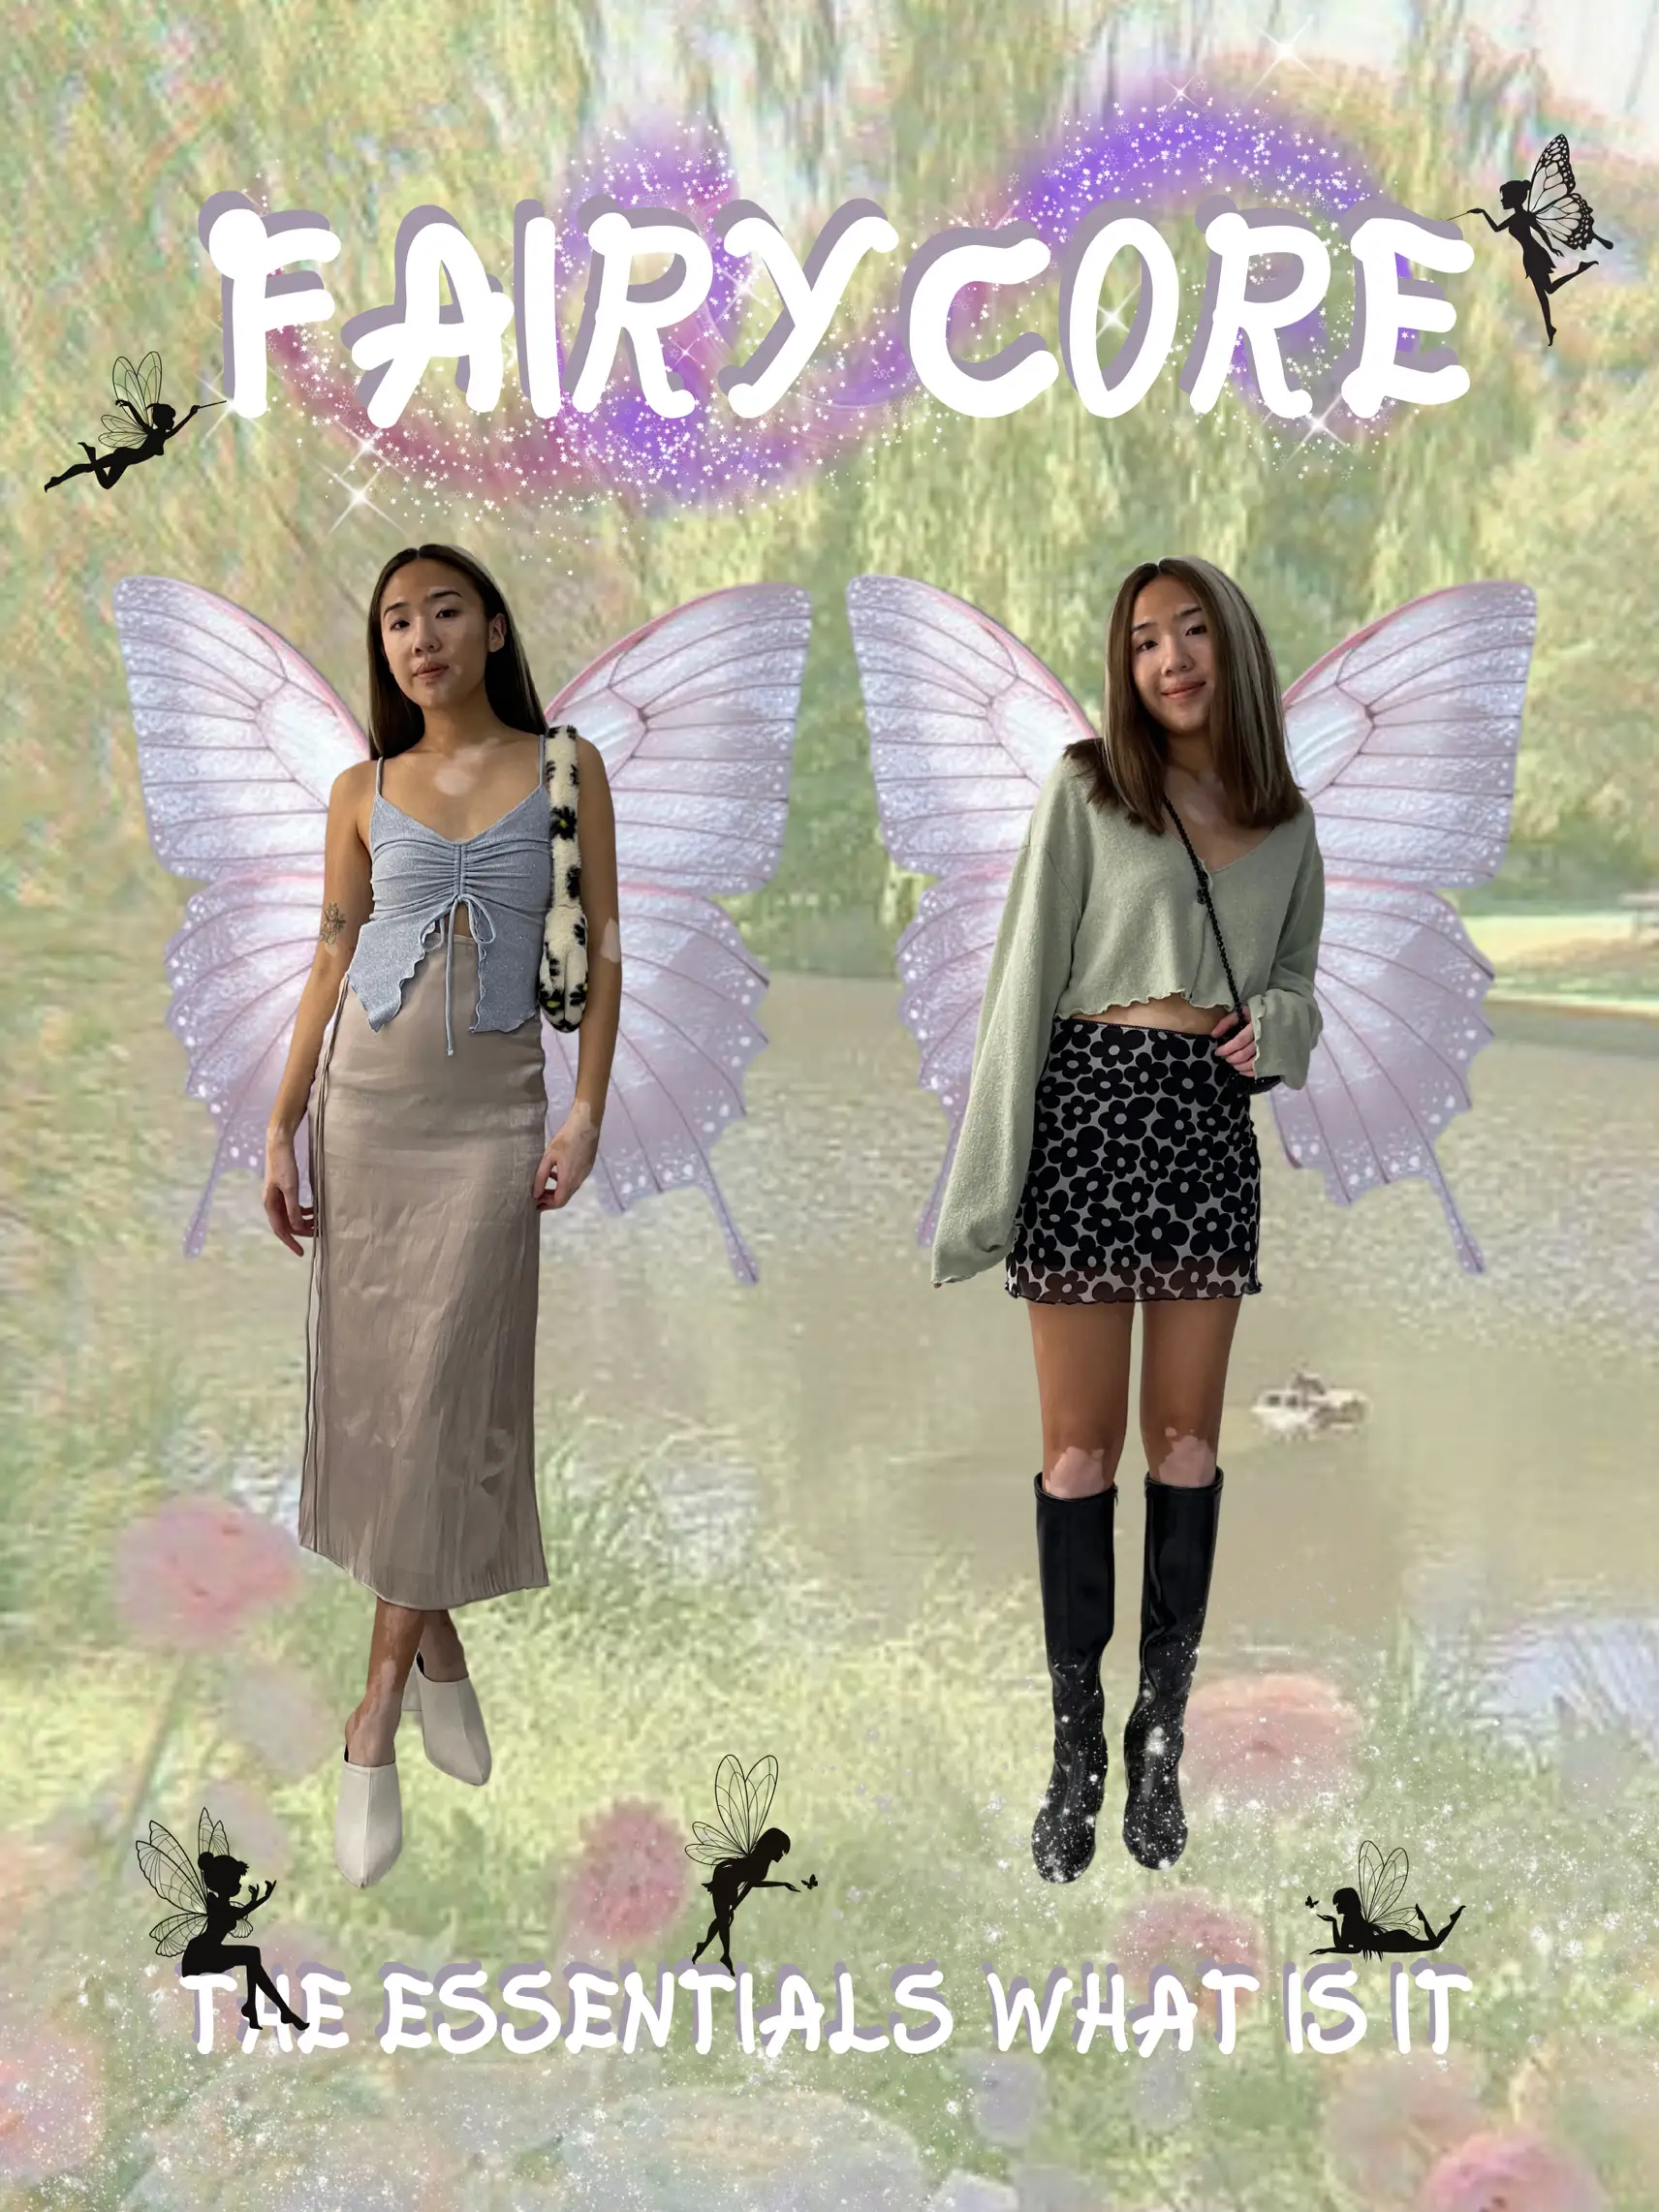 Fairycore Aesthetic: A Guide to Outfits & Beauty